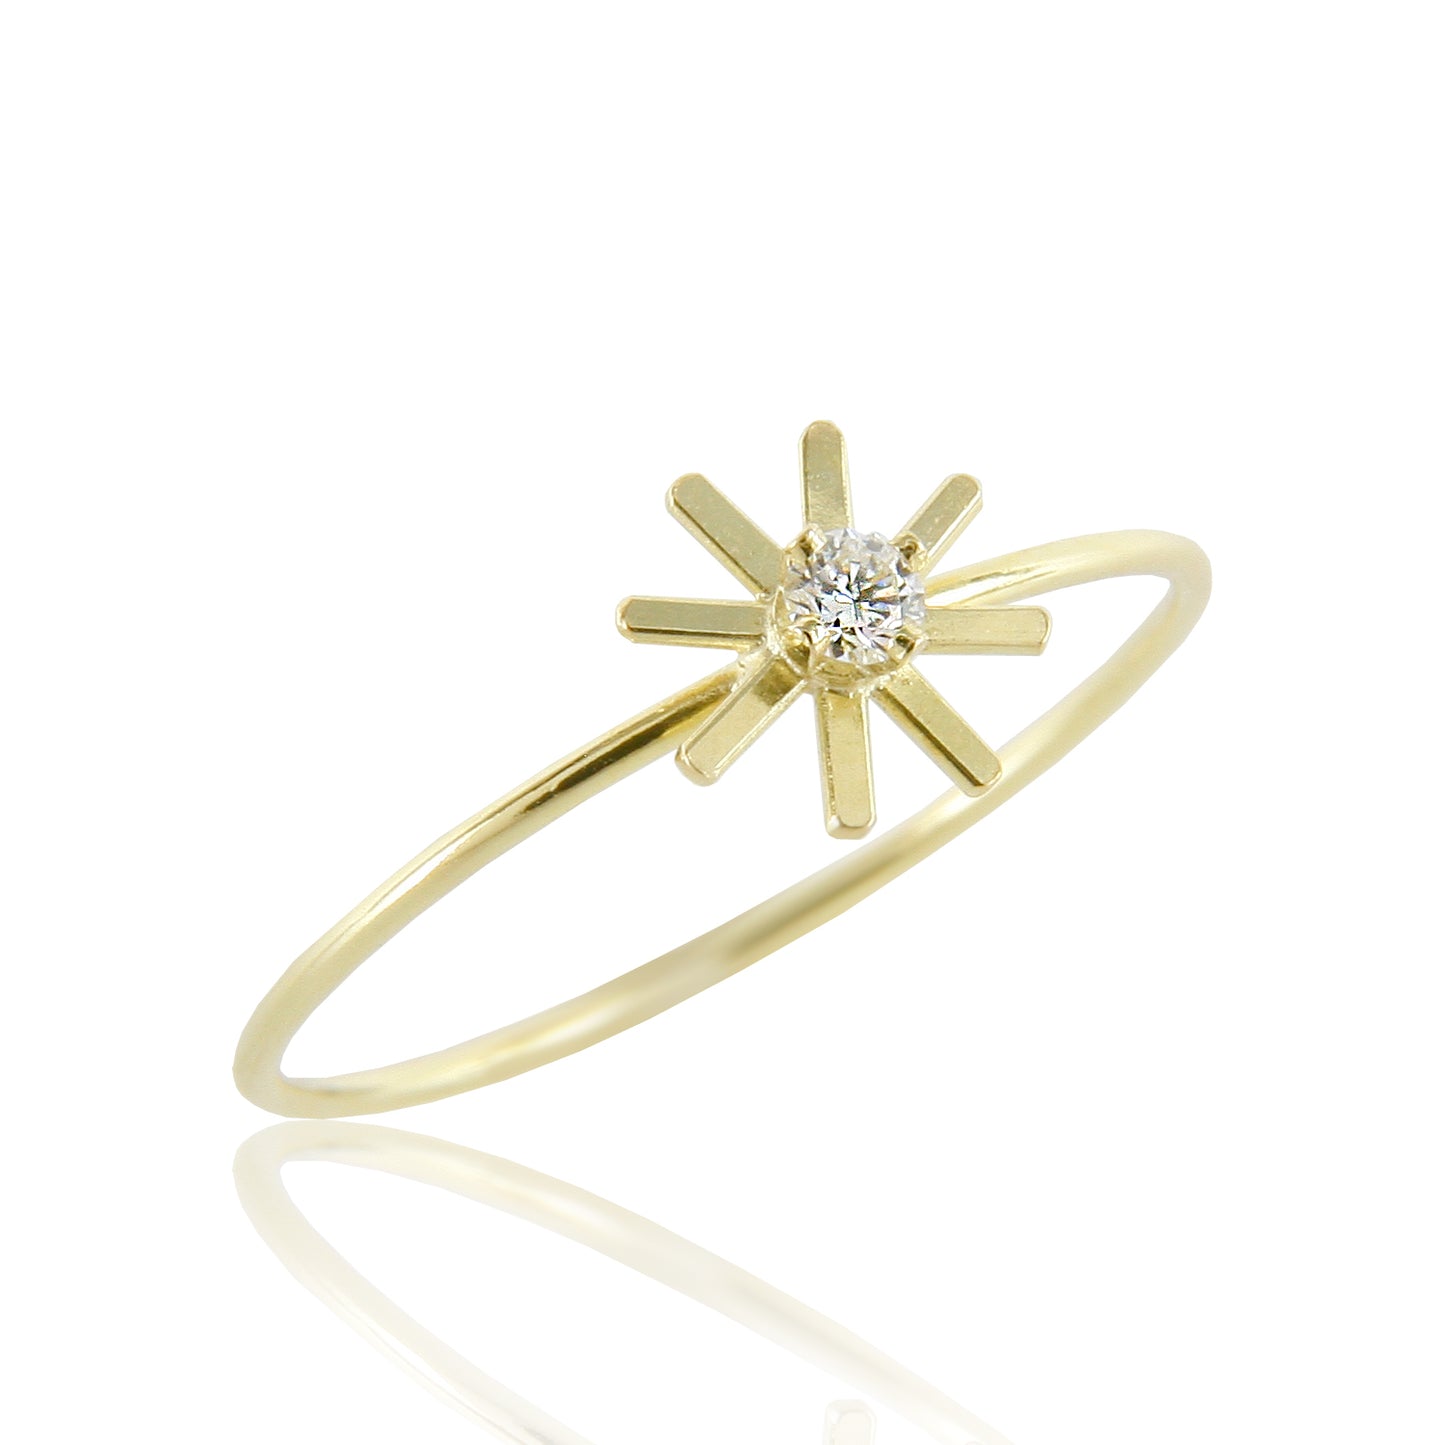 This 18ct yellow gold fine diamond ring is from our Pop Up Daisy Collection. The Flower motif is made up from fine gold petals and features a central Diamond set collet.